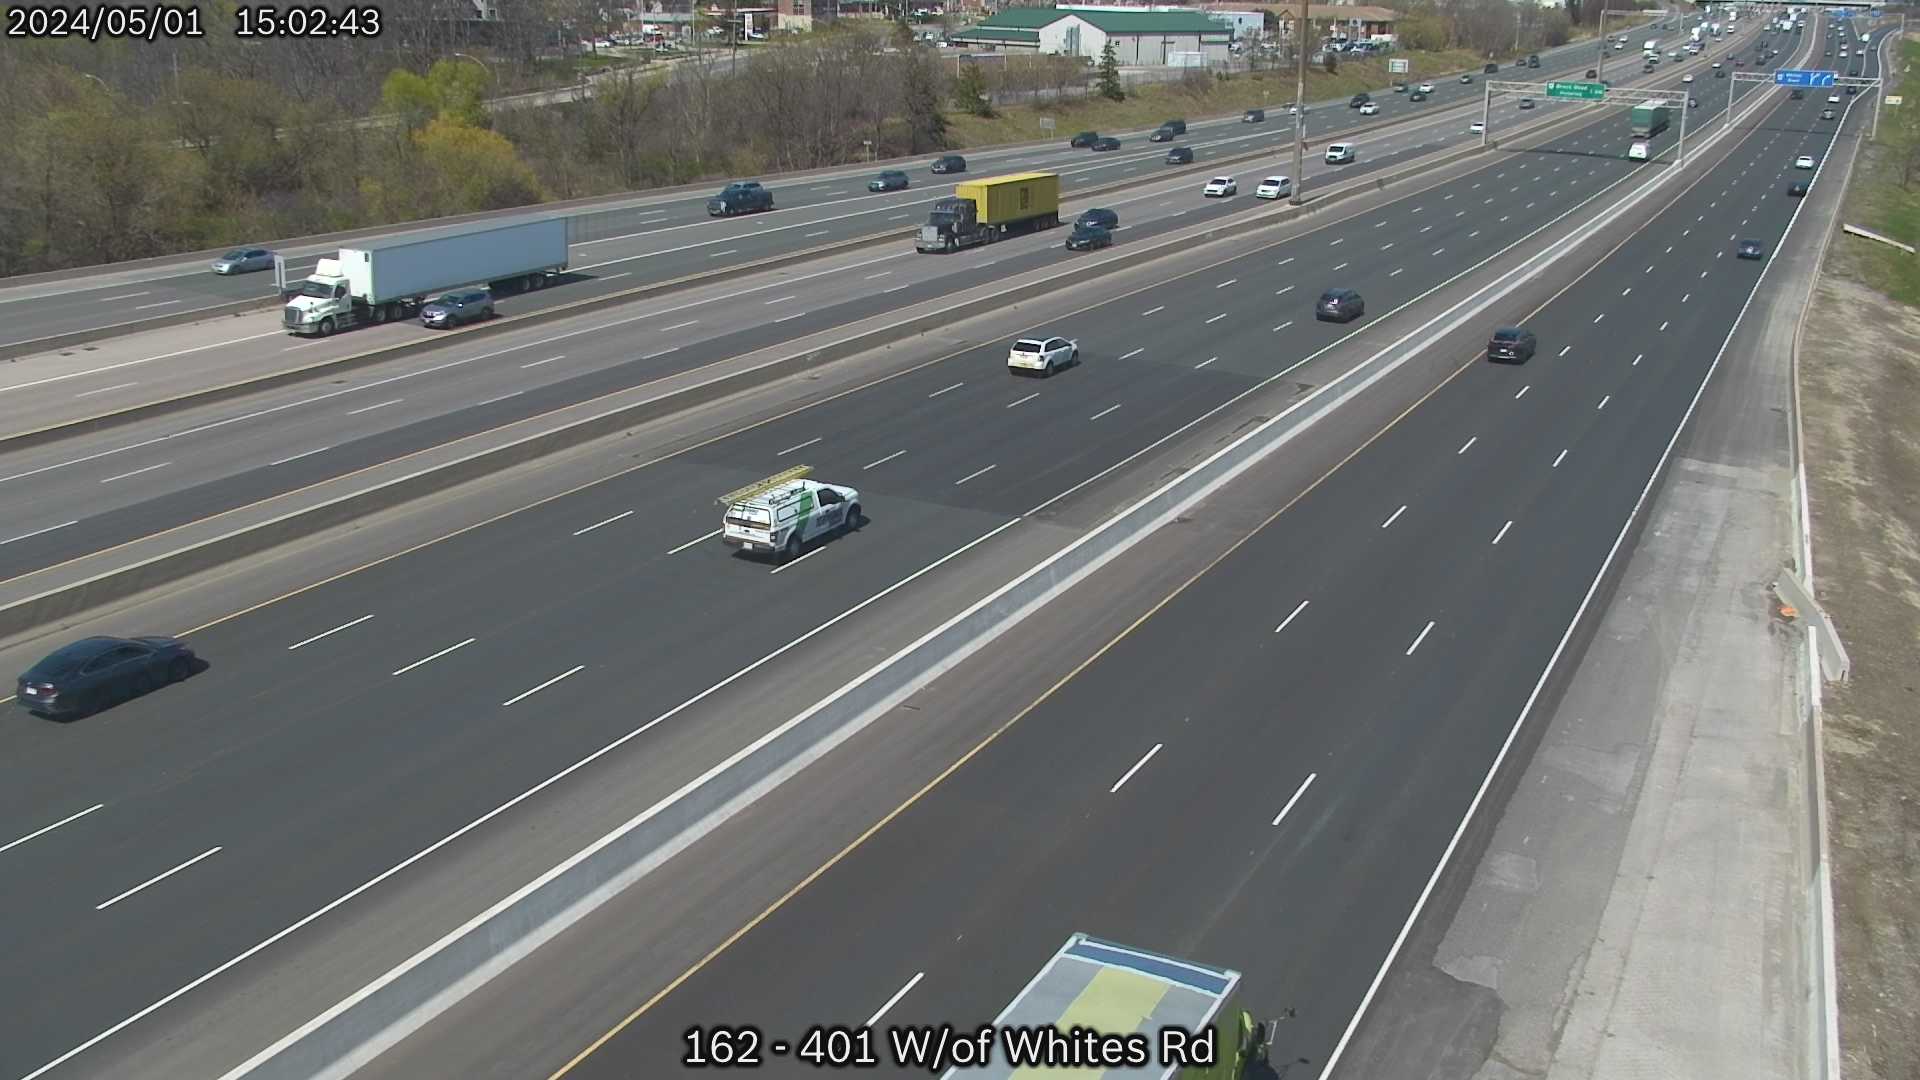 Webcam of South side of Highway 401 near Rougemout Dr courtesy of the MTO